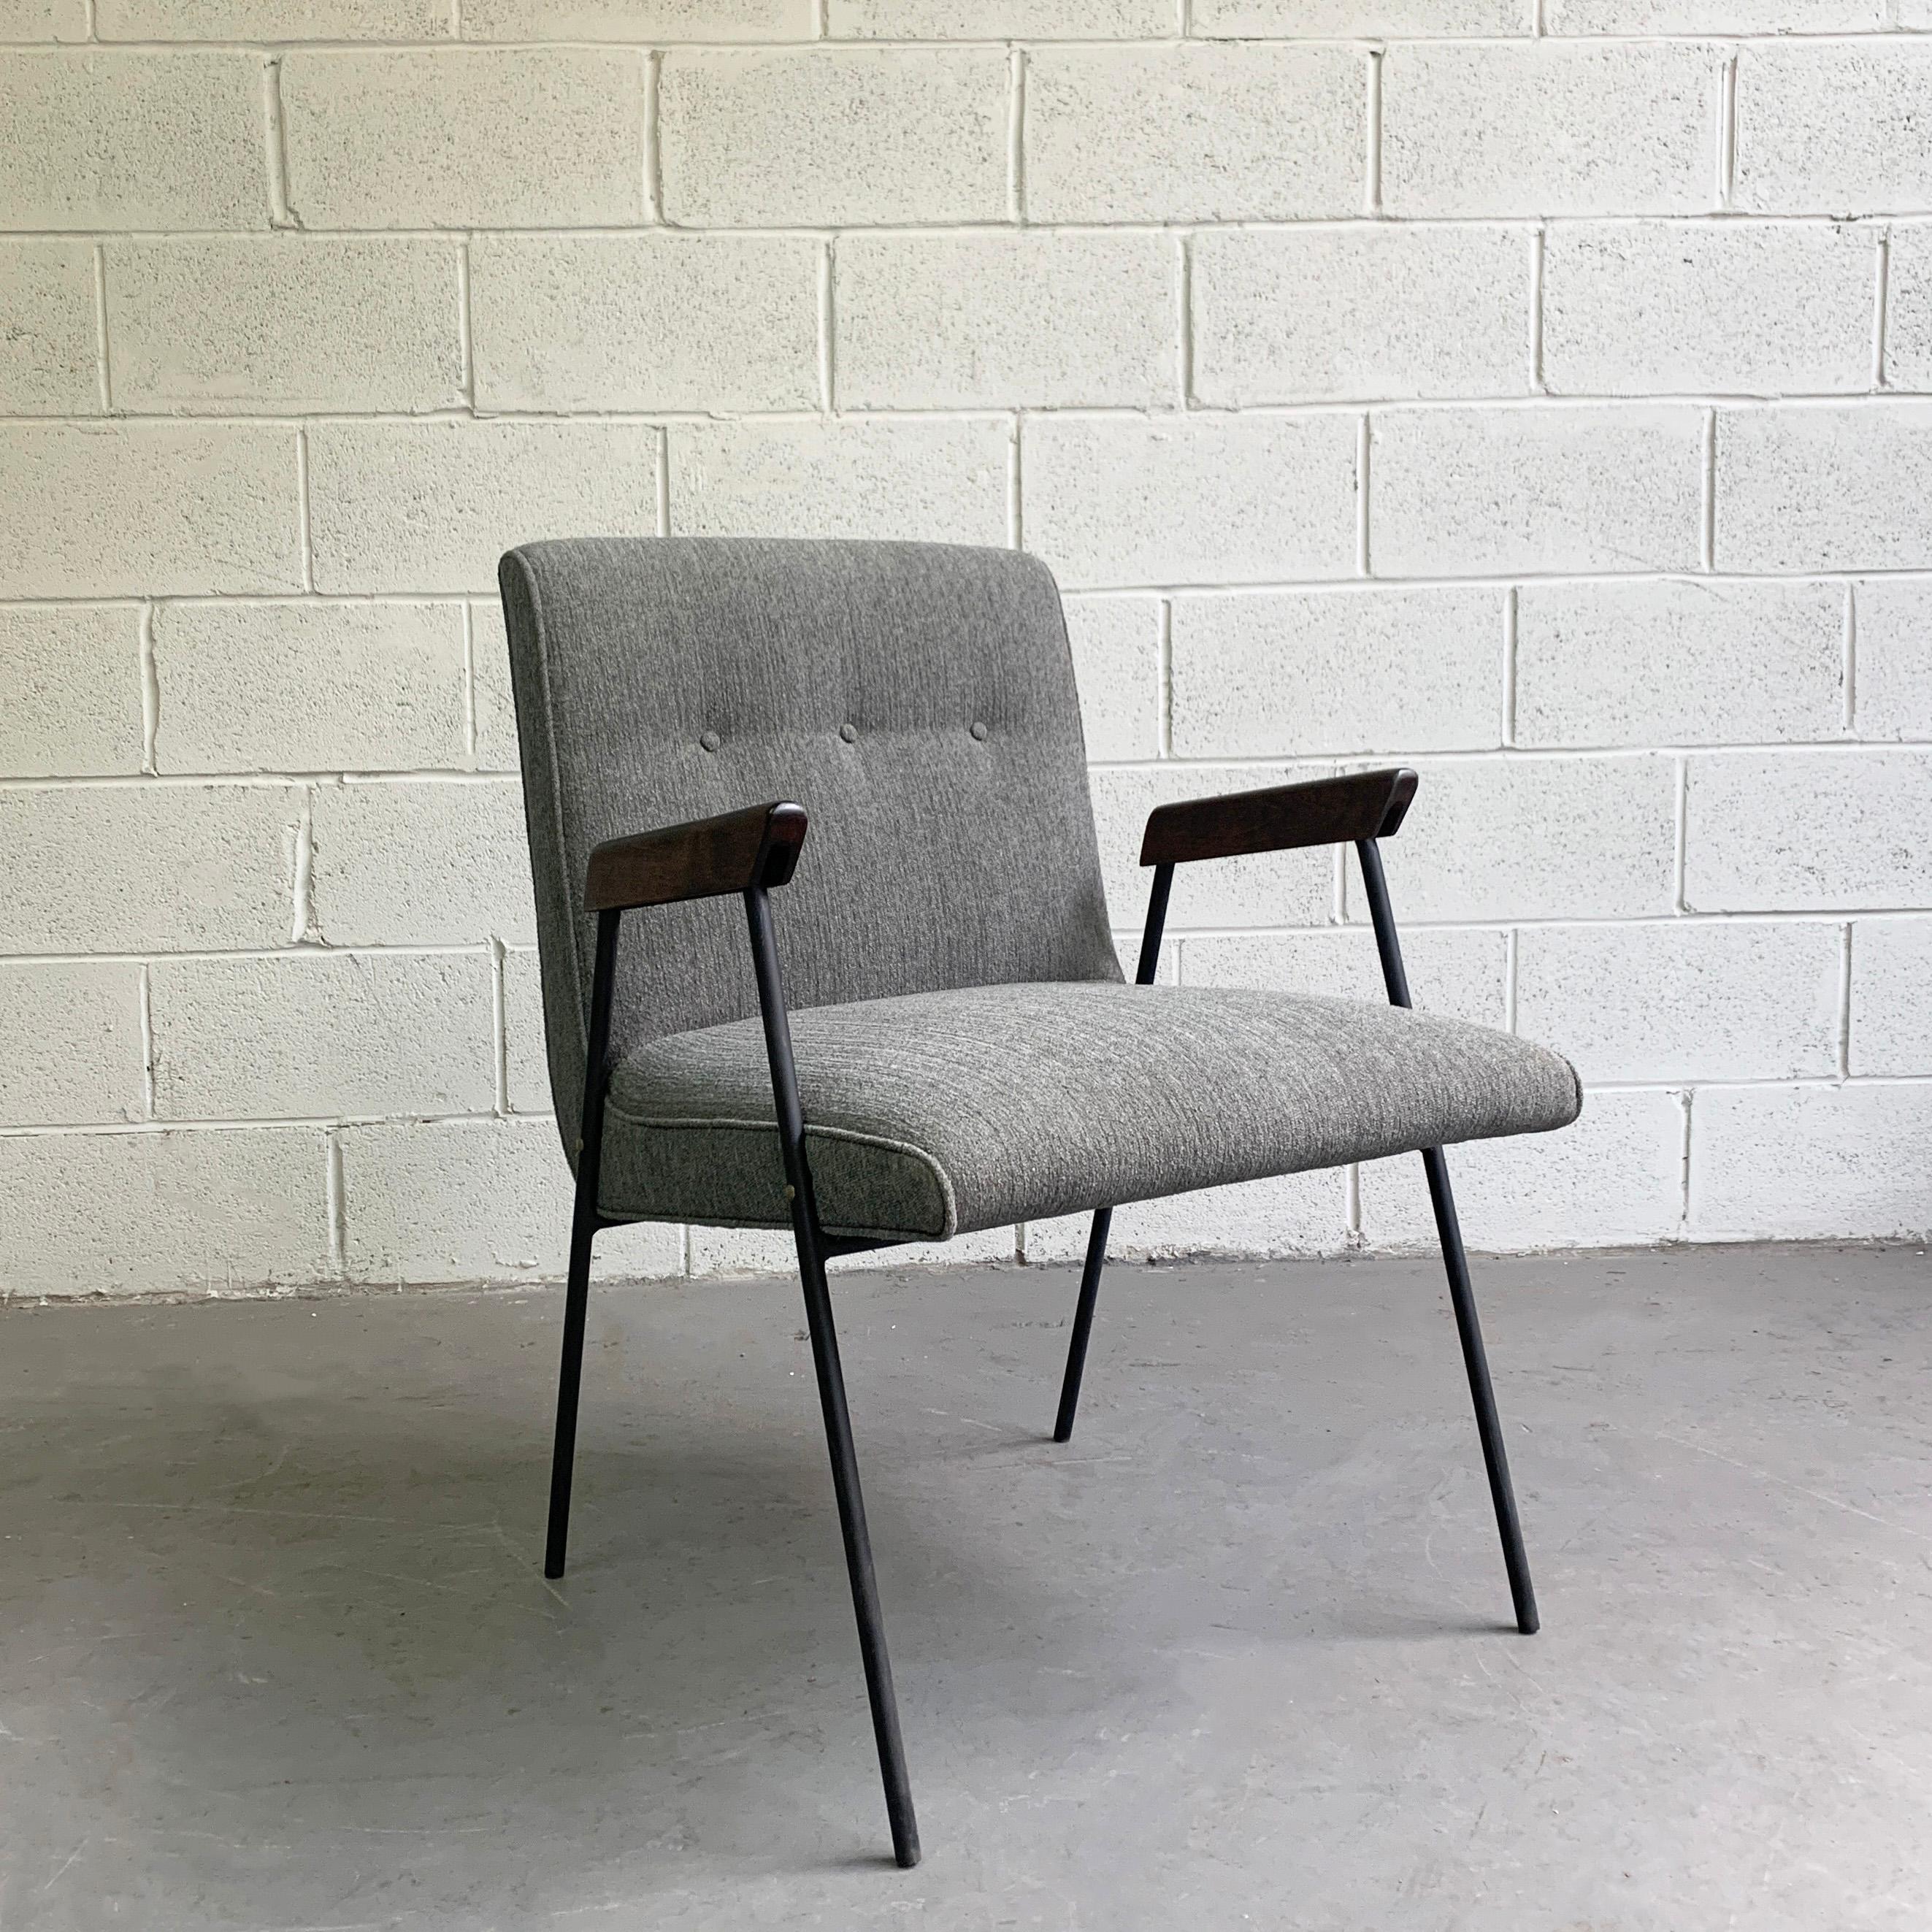 Mid-Century Modern armchair attributed to Milo Baughman for Pacific Iron features a gray/blue chenille upholstered, scoop body with minimal wrought iron frame and walnut armrests.